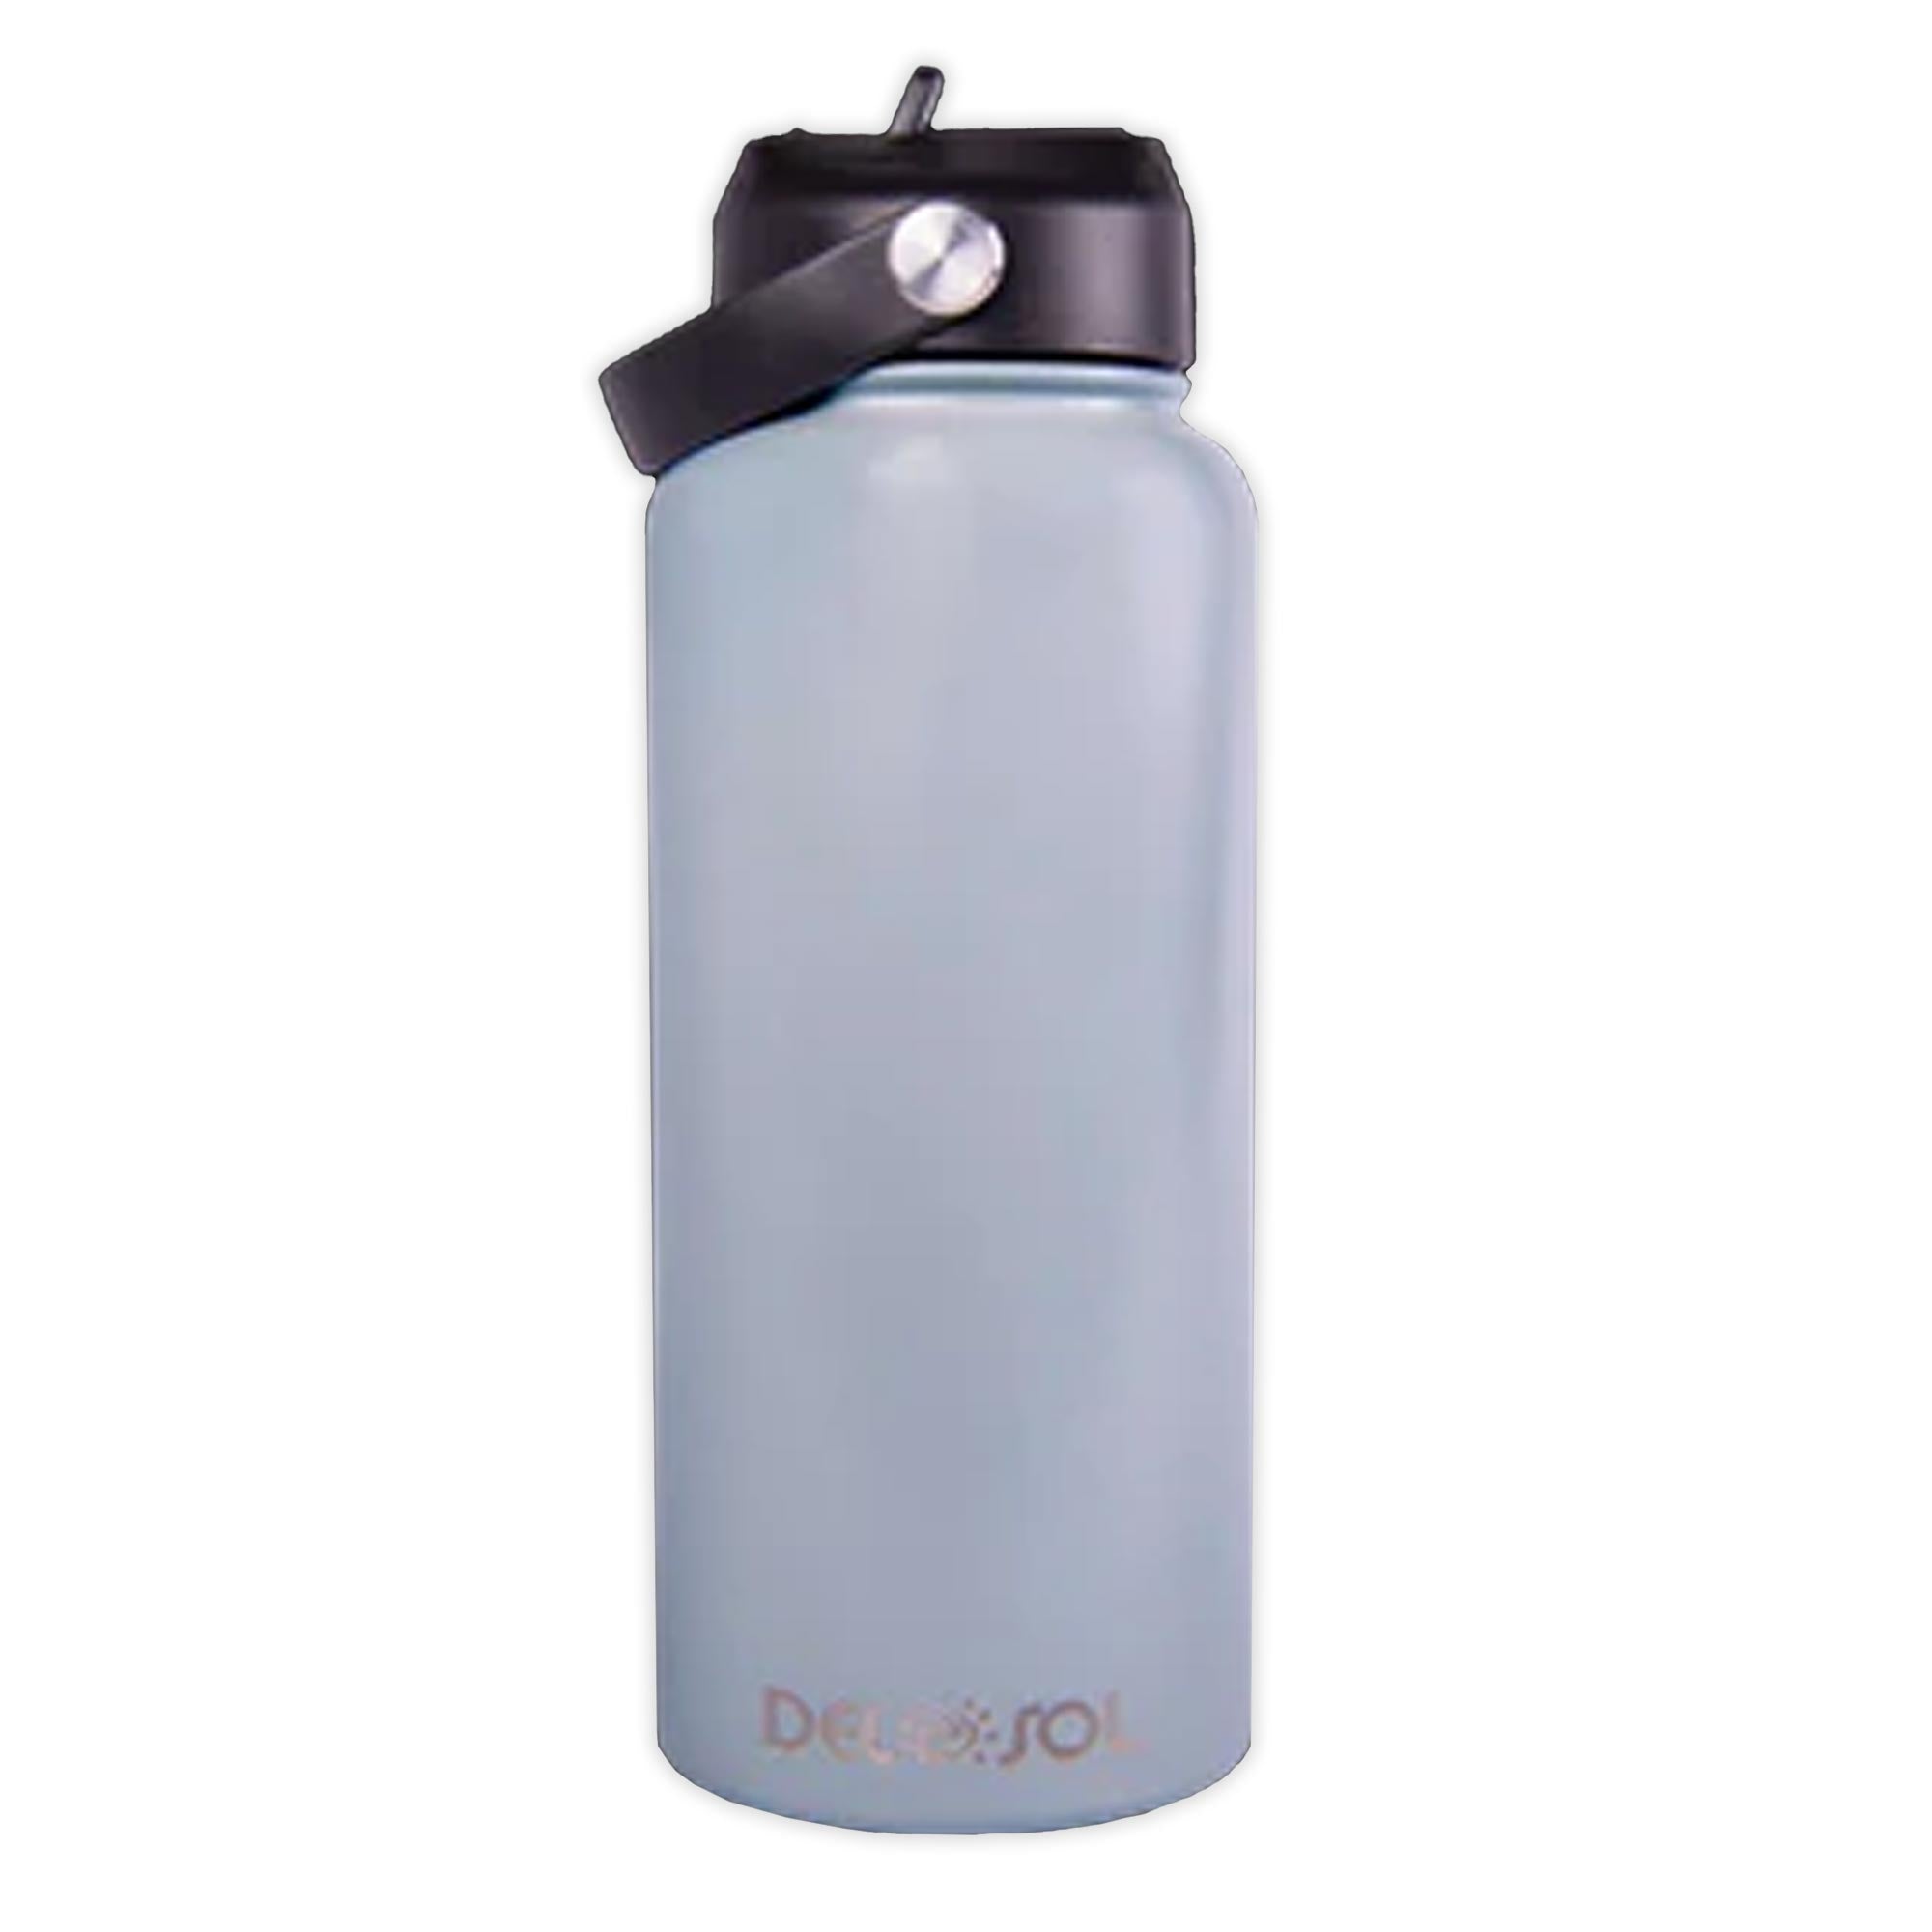 Cupture® Travel Tumbler Stainless Steel - 32 Oz (Silver) 